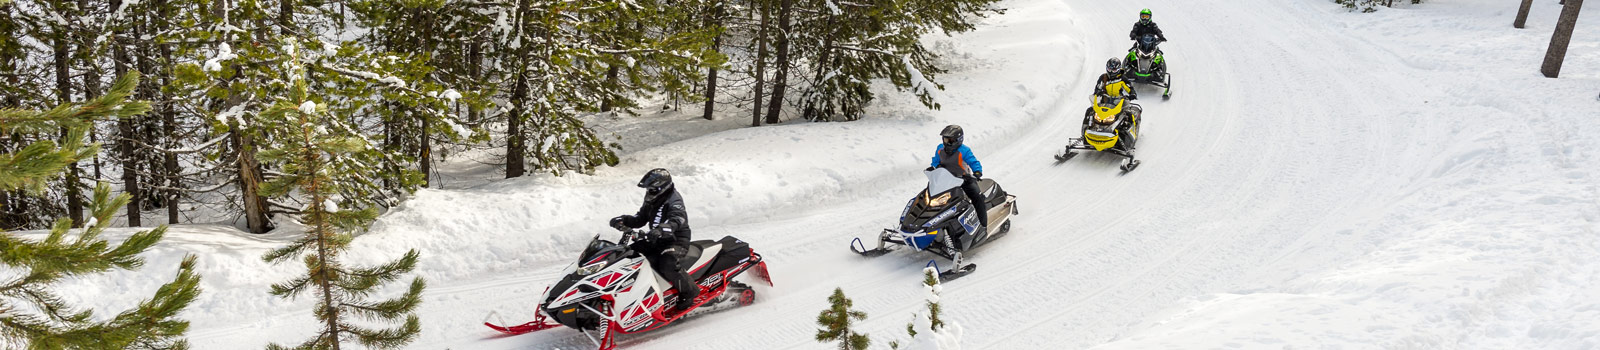 Snowmobilers riding trails